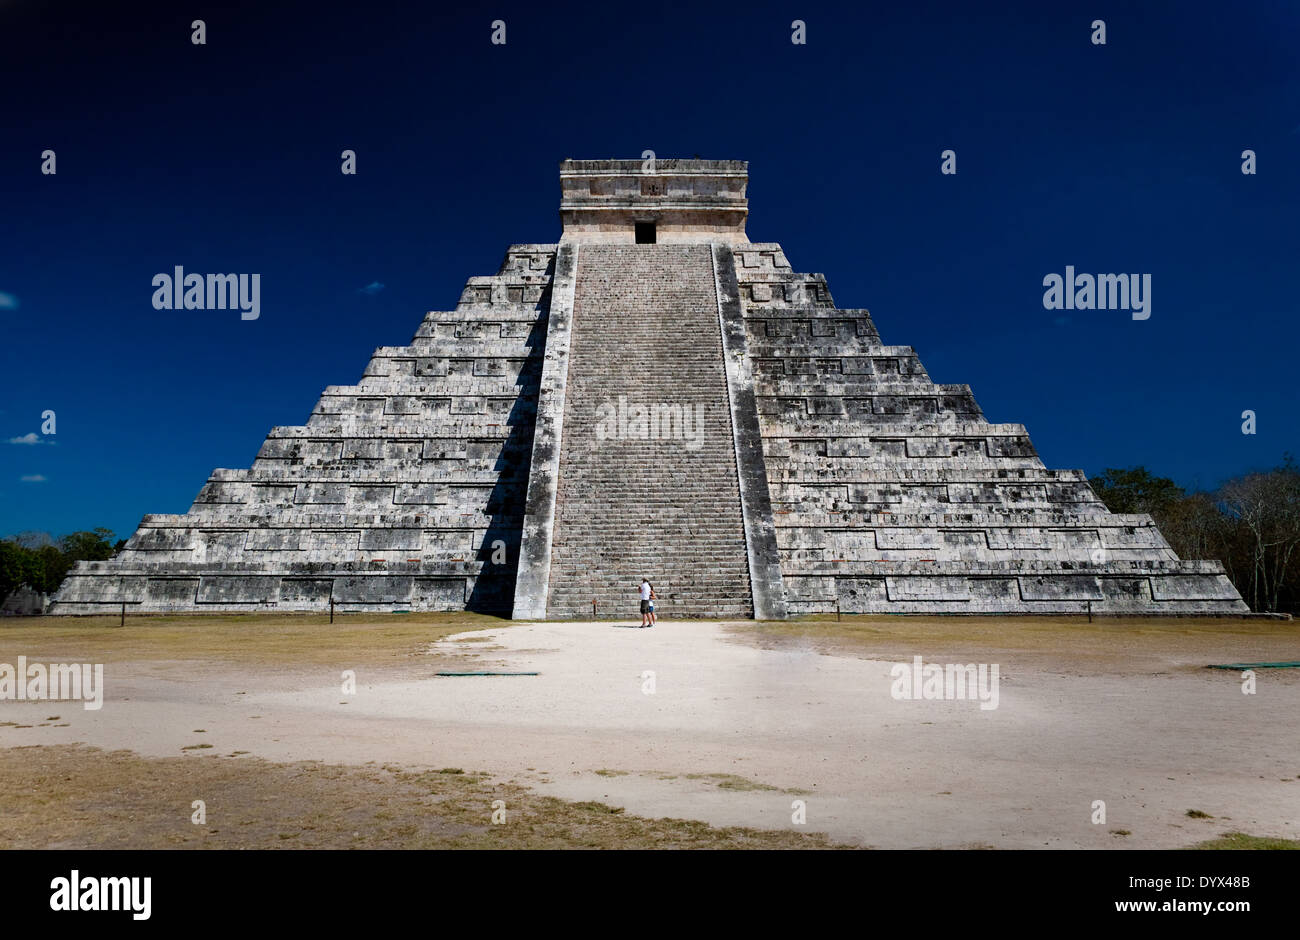 Ziggurat (pyramid) at Chichen Itza with two people staring at it in front of the stairway. Dark blue sky Stock Photo